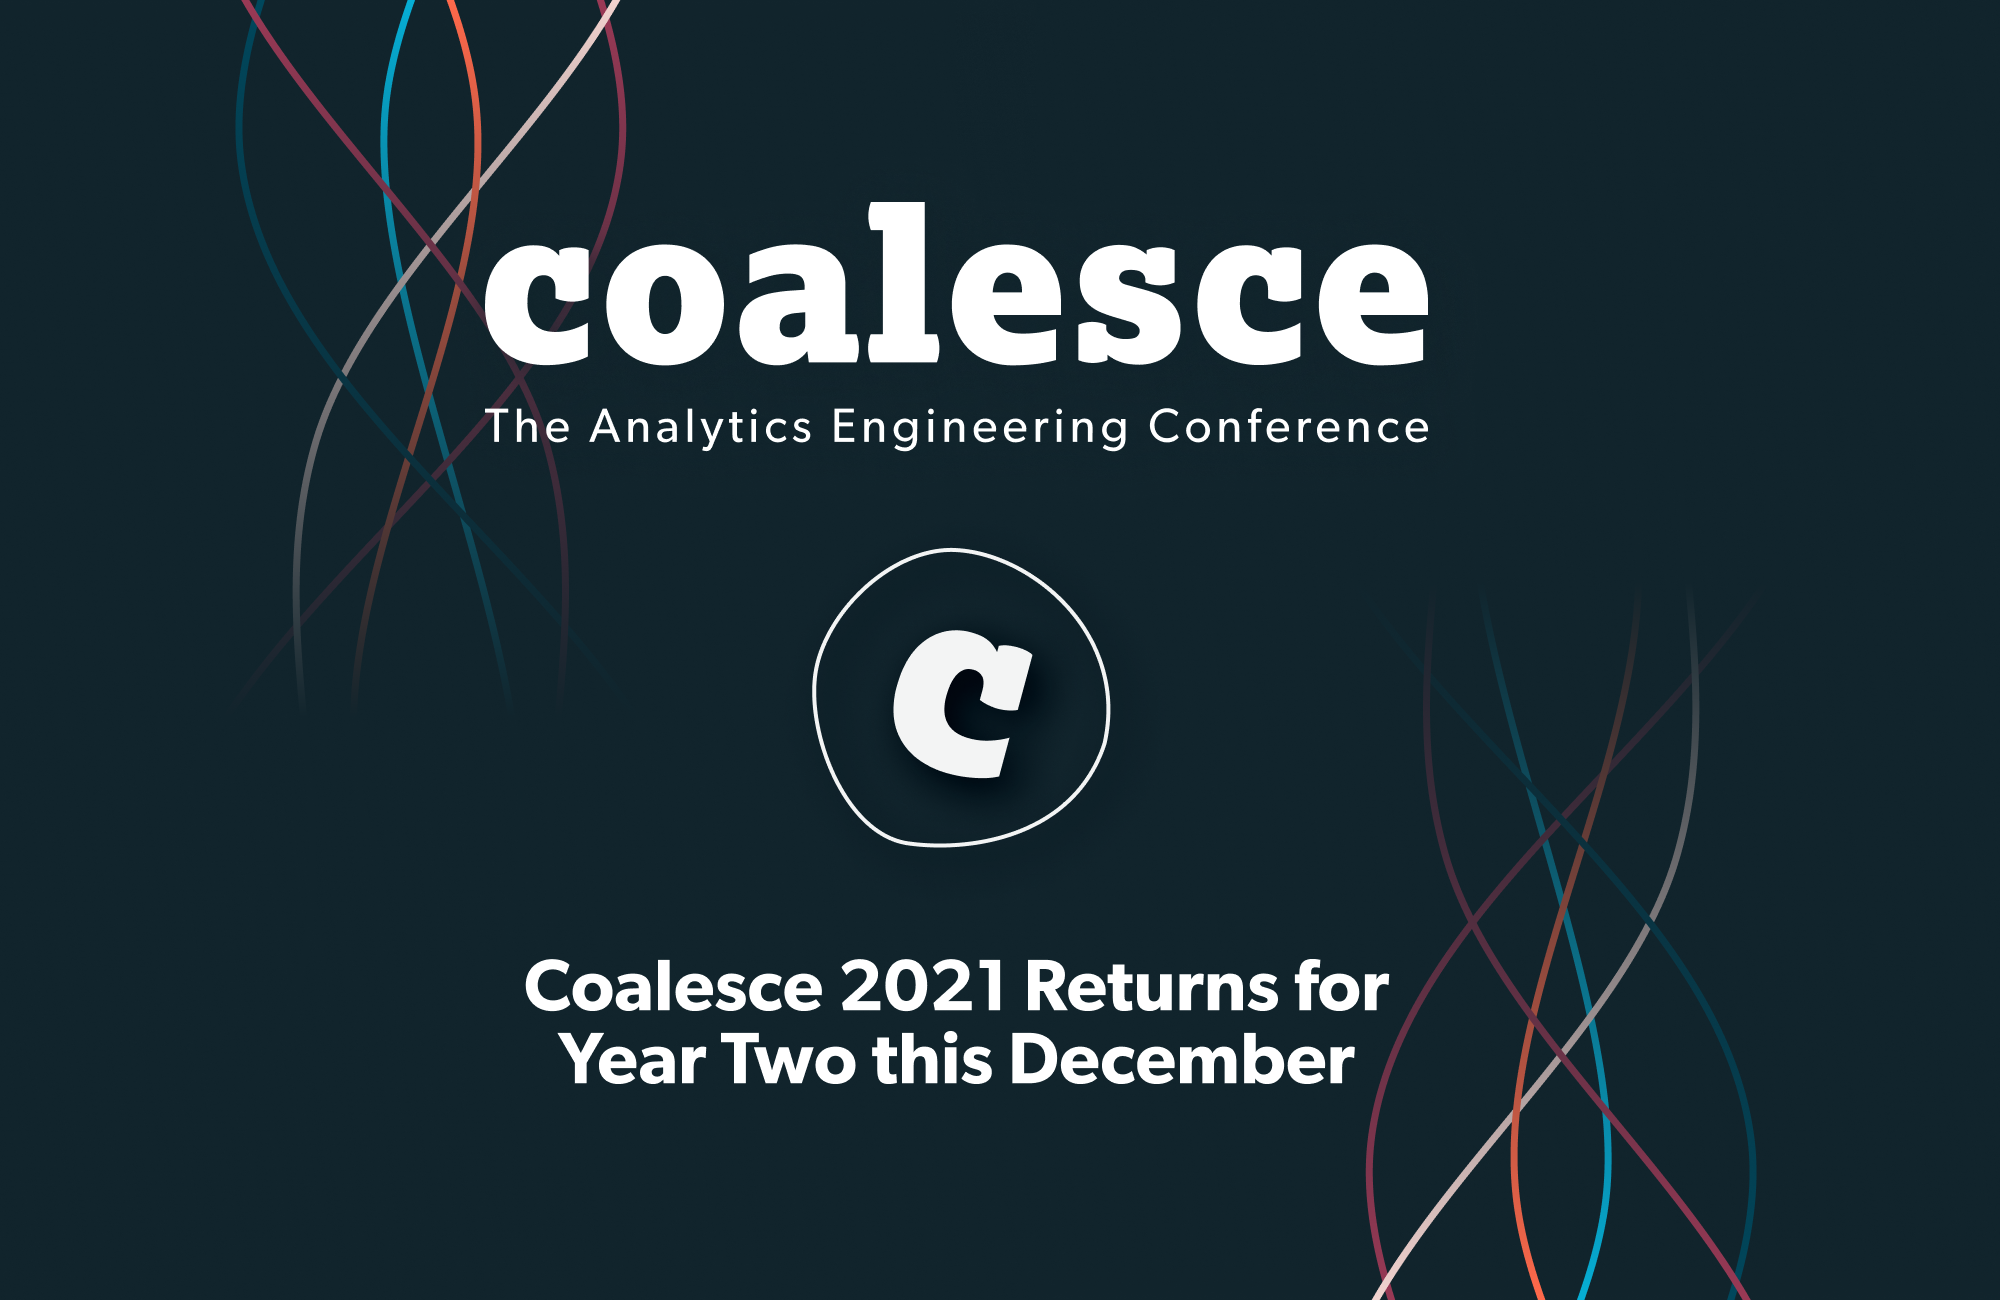 Coalesce returns for year two this December